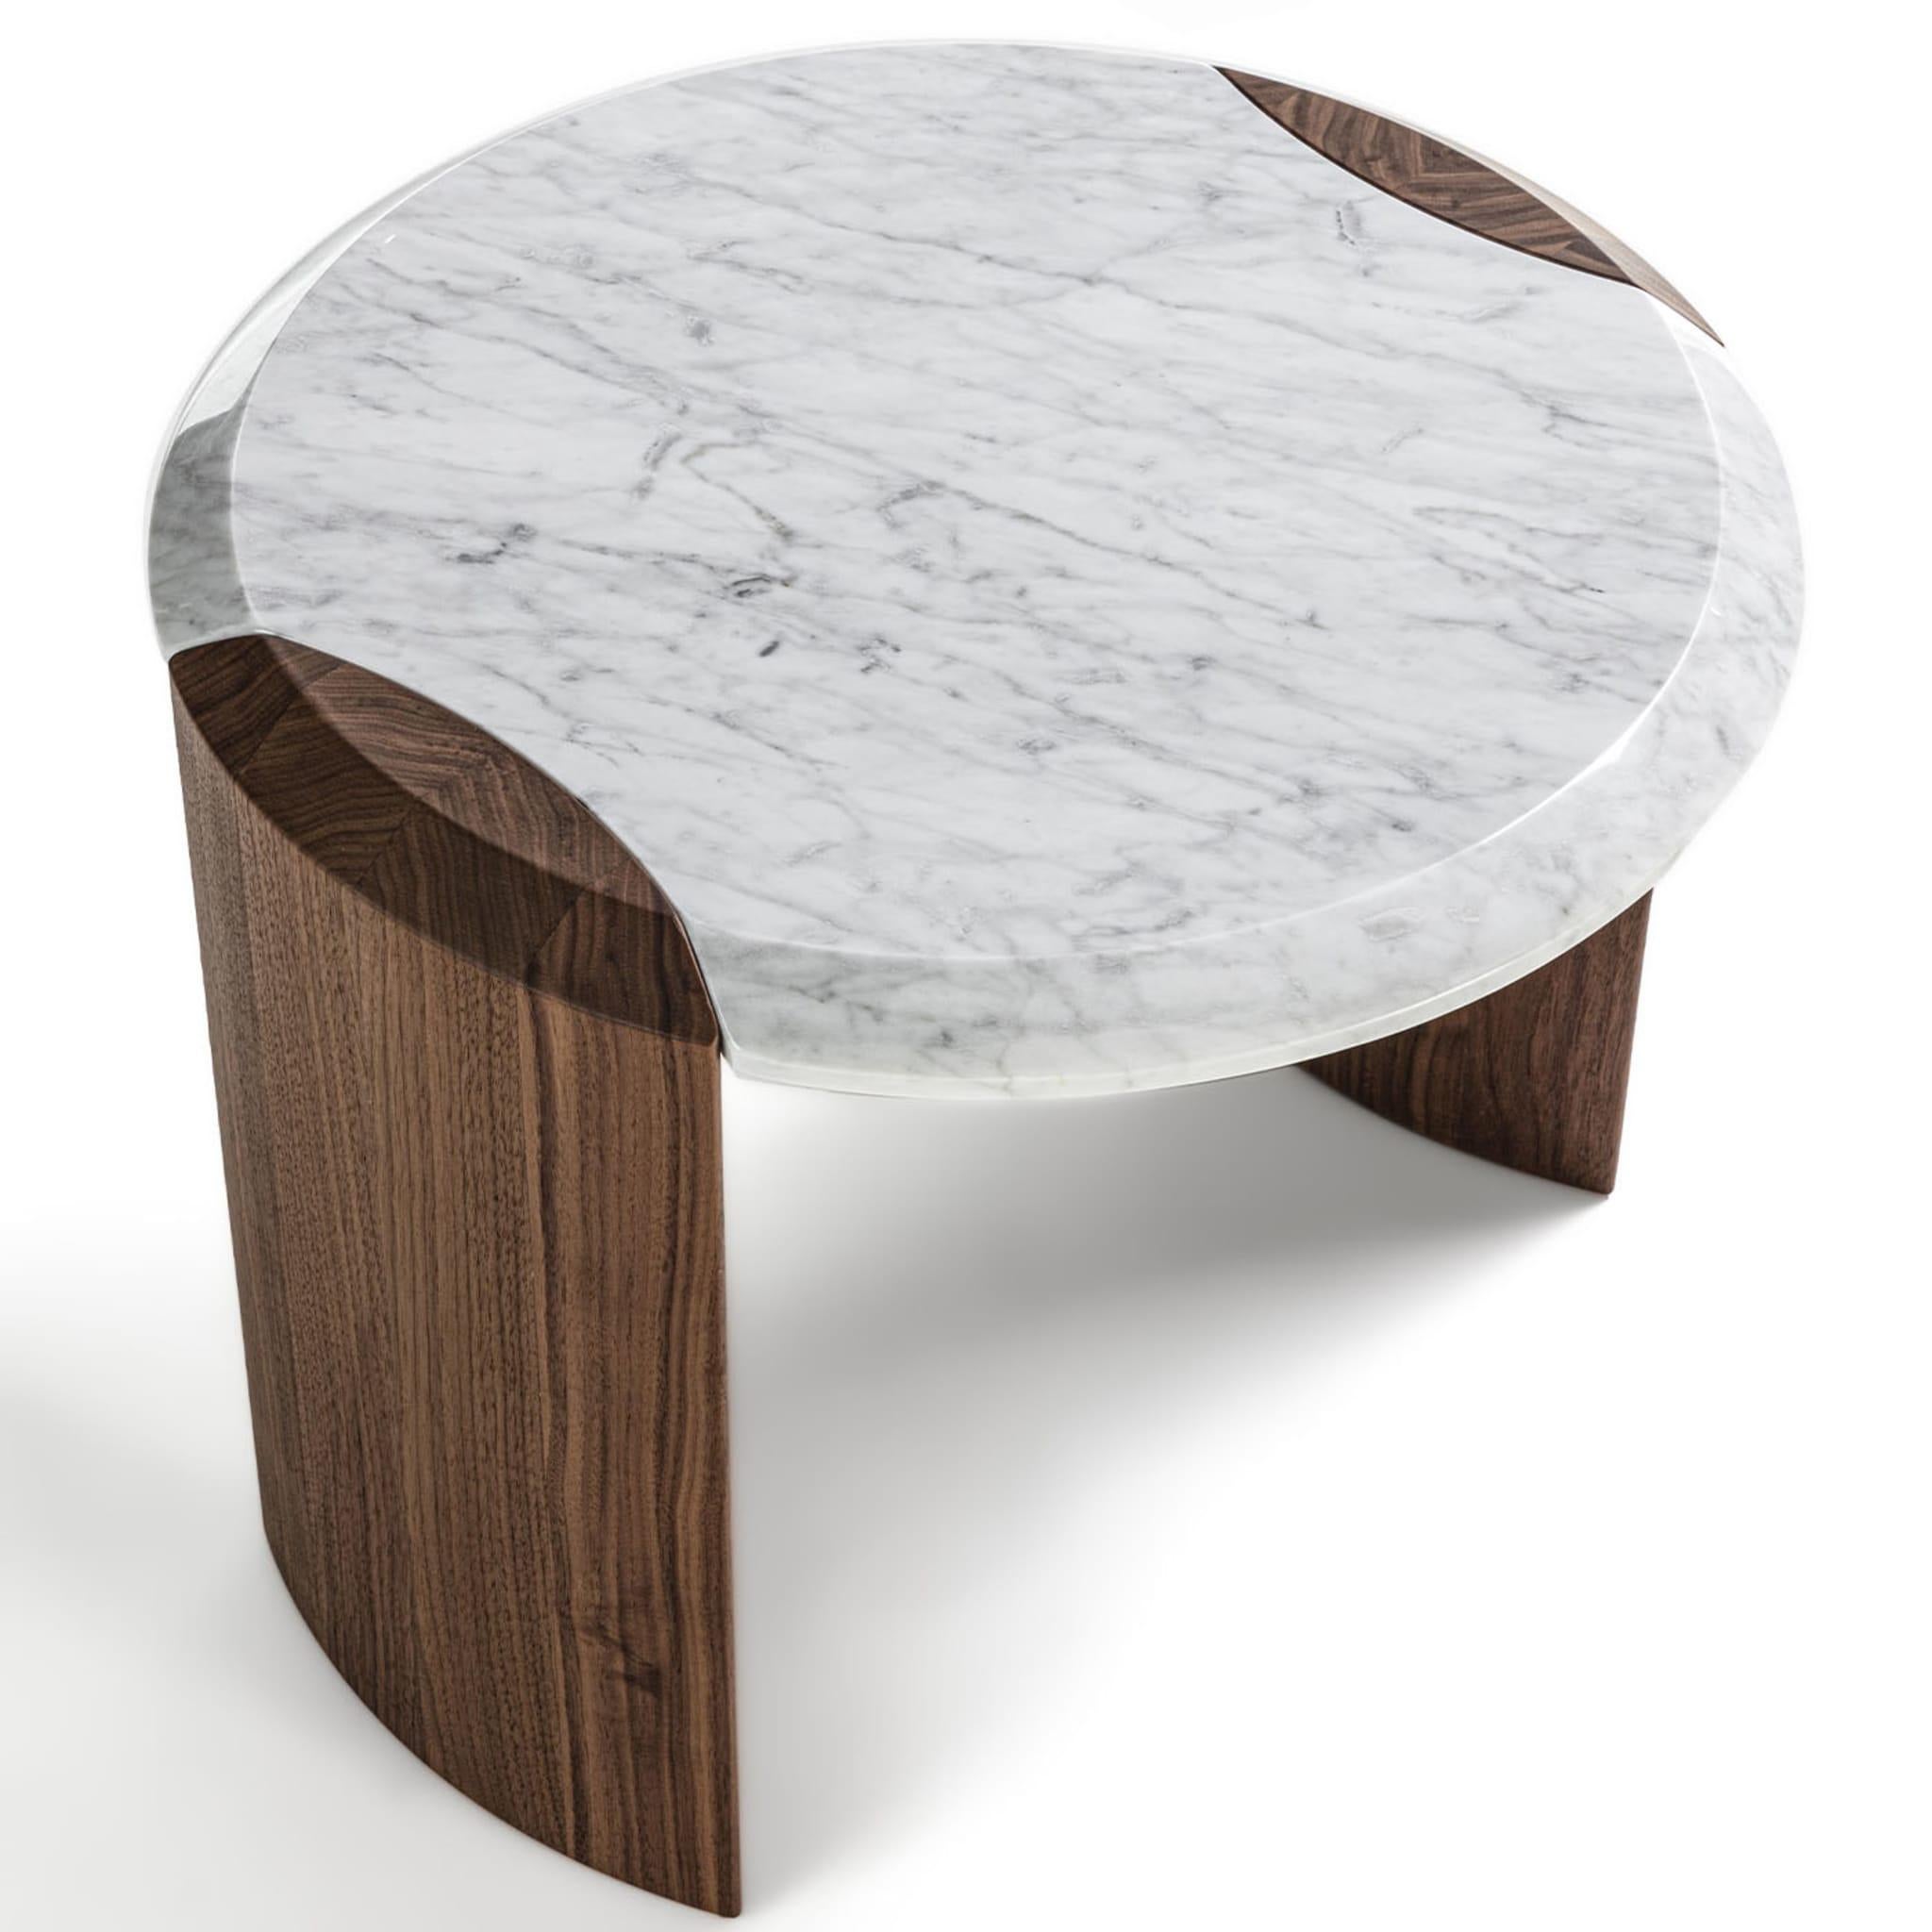 An elegant seamless joint distinguishes the exclusive series of tables this side table belongs to. The structural layout harmoniously coexists with a neat contrast of hues and finishes between the prized Carrara marble top and the almond-cut legs,